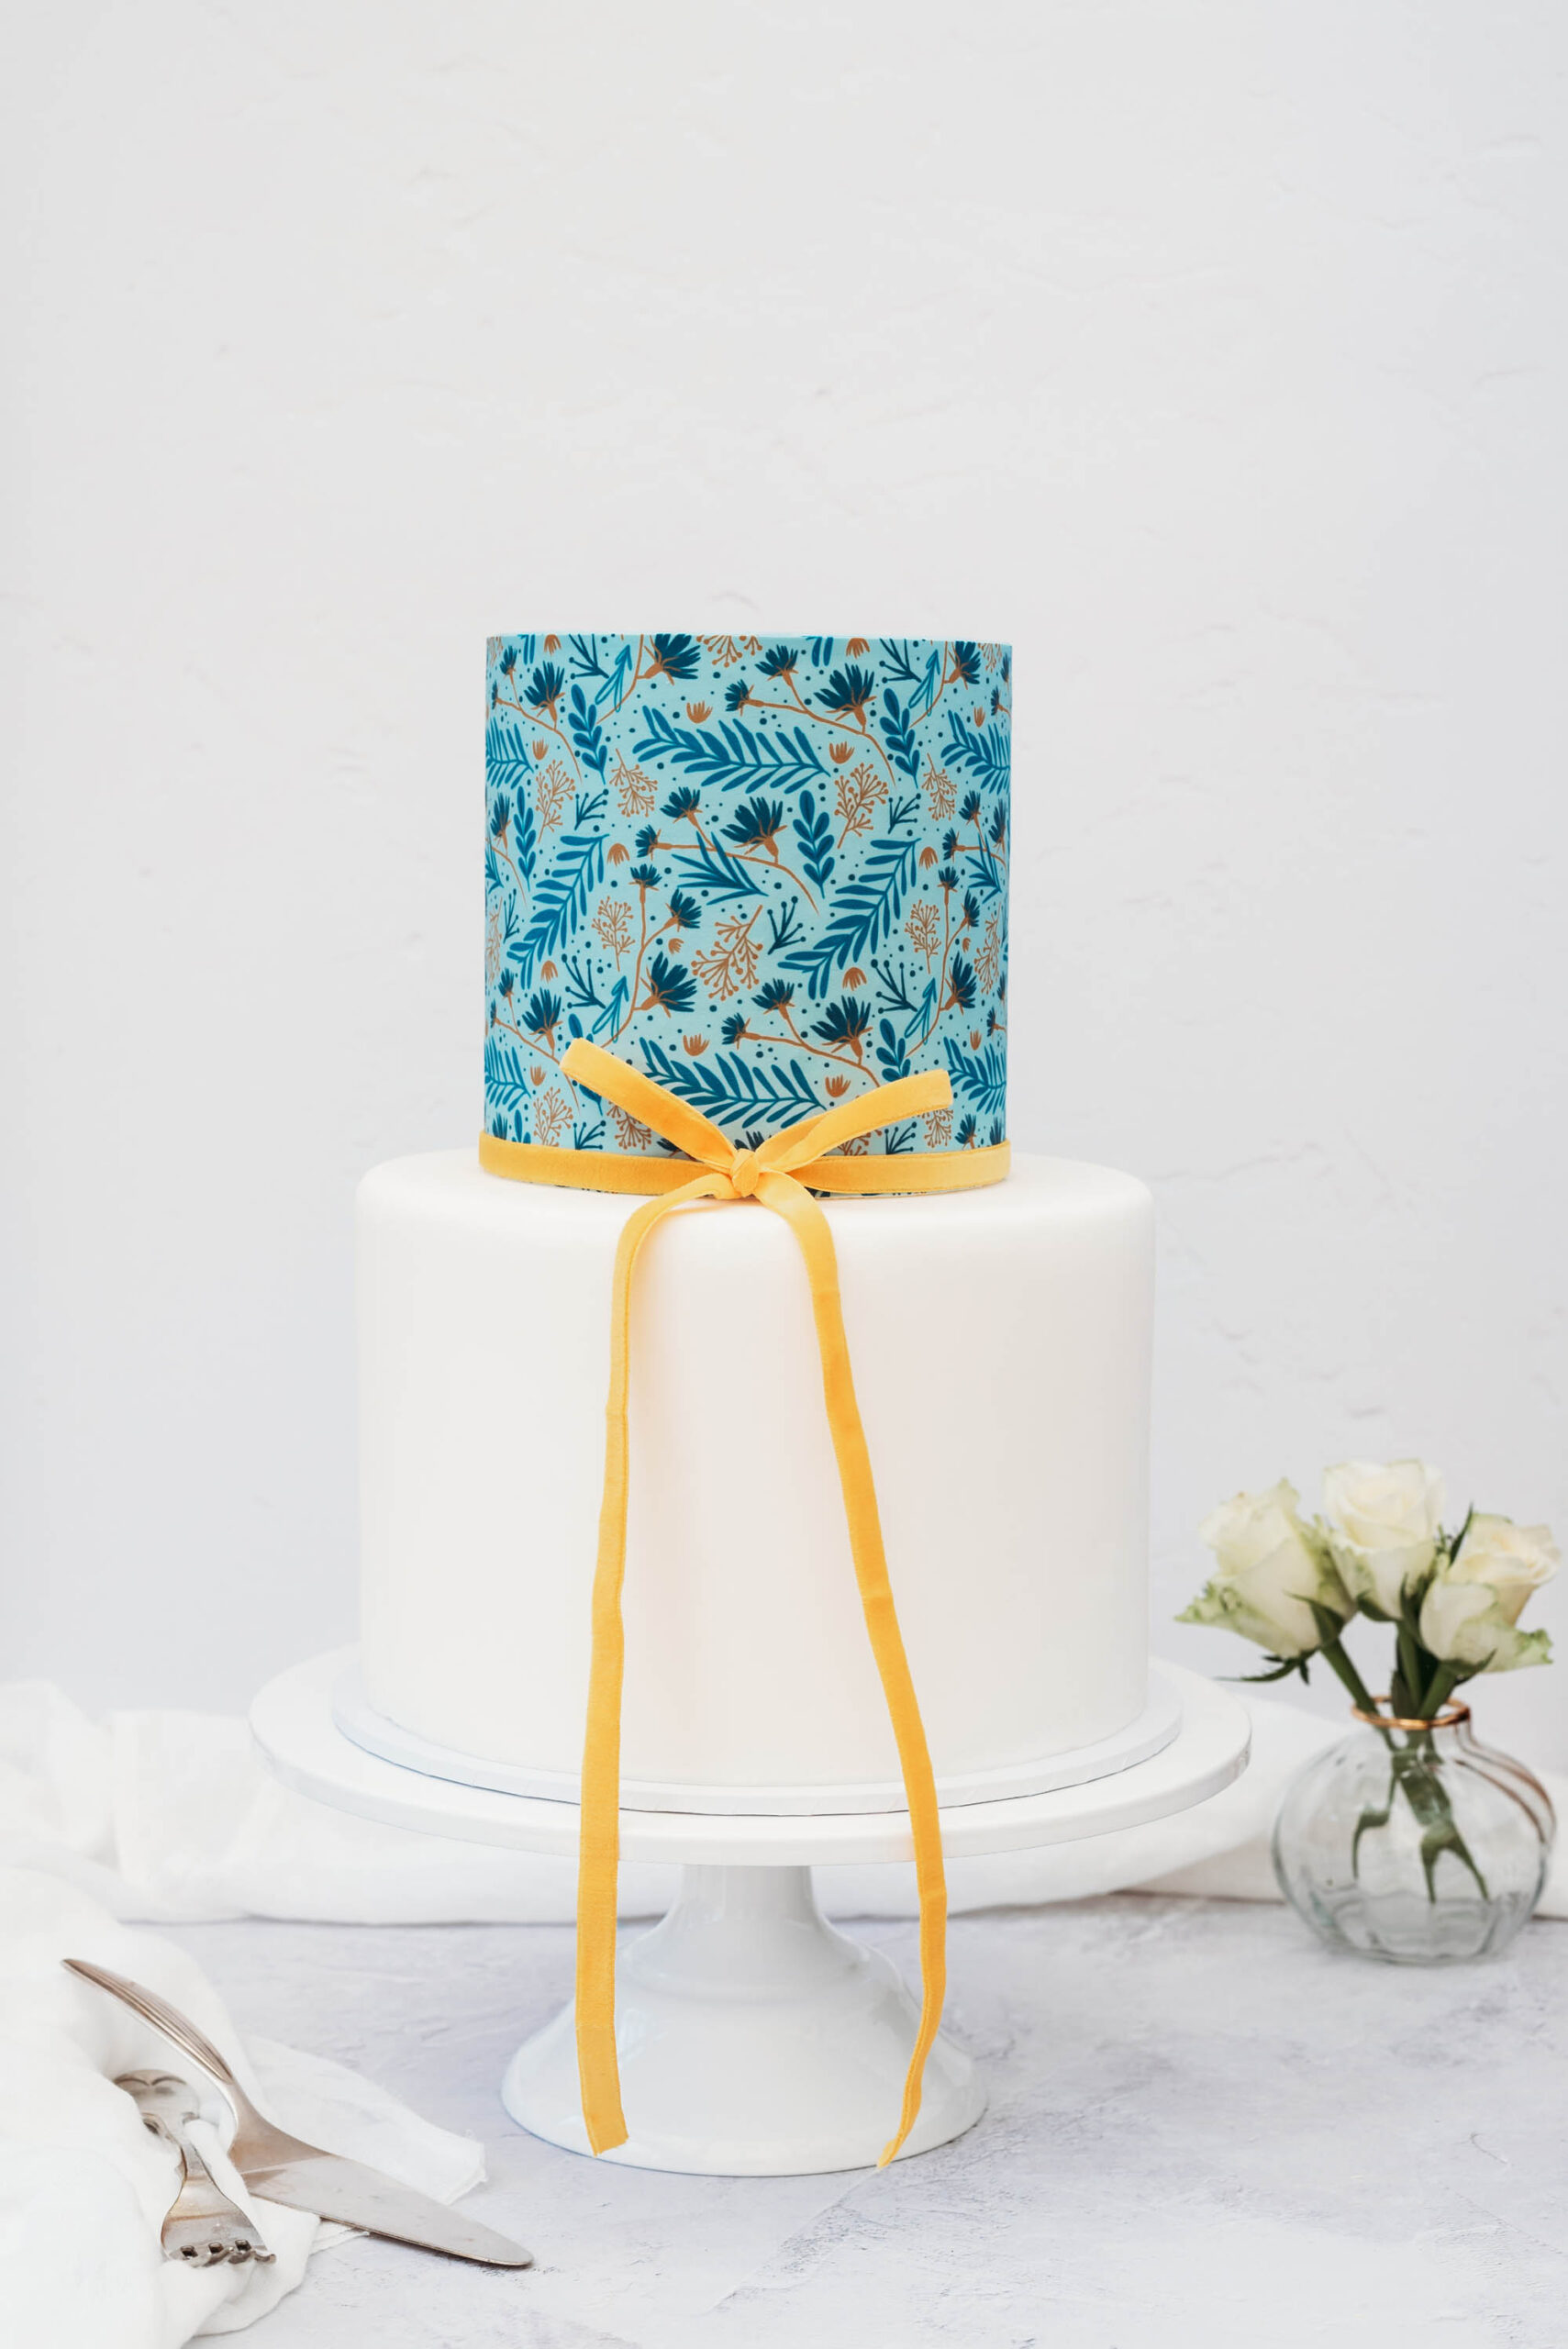 printed botanical wedding cake with two tiers. The top tier has a modern leaf and flower illustration in blues, with a thin gold ribbon around, and the bottom tier is simple white. Cakes by Tasha